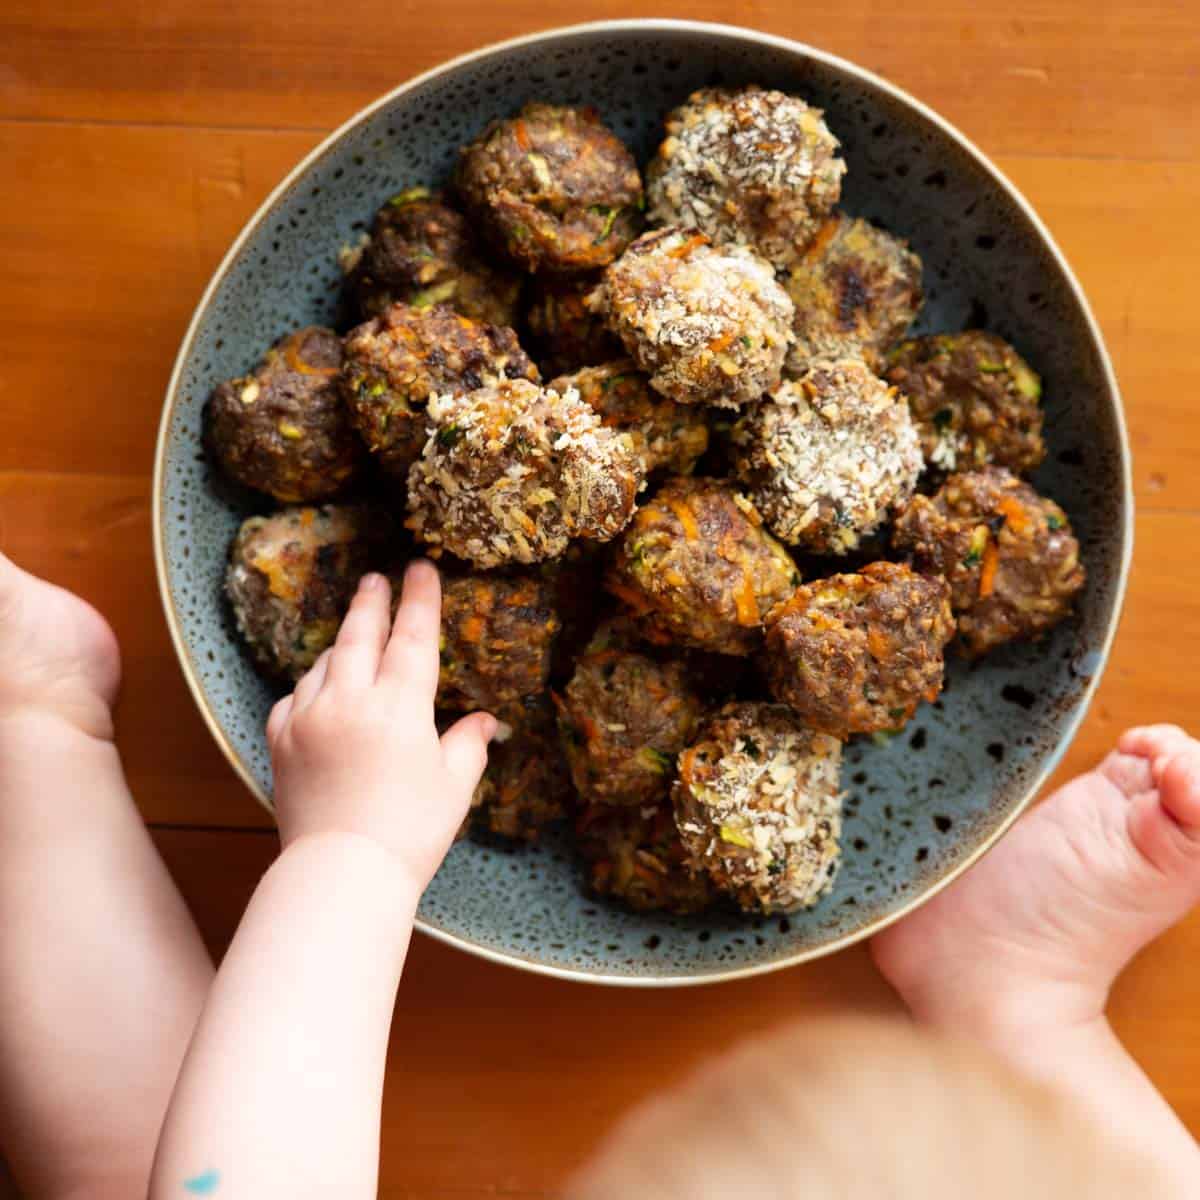 A large bowl of rissoles sitting on a wooden floor, a baby's hand reaching for one. 